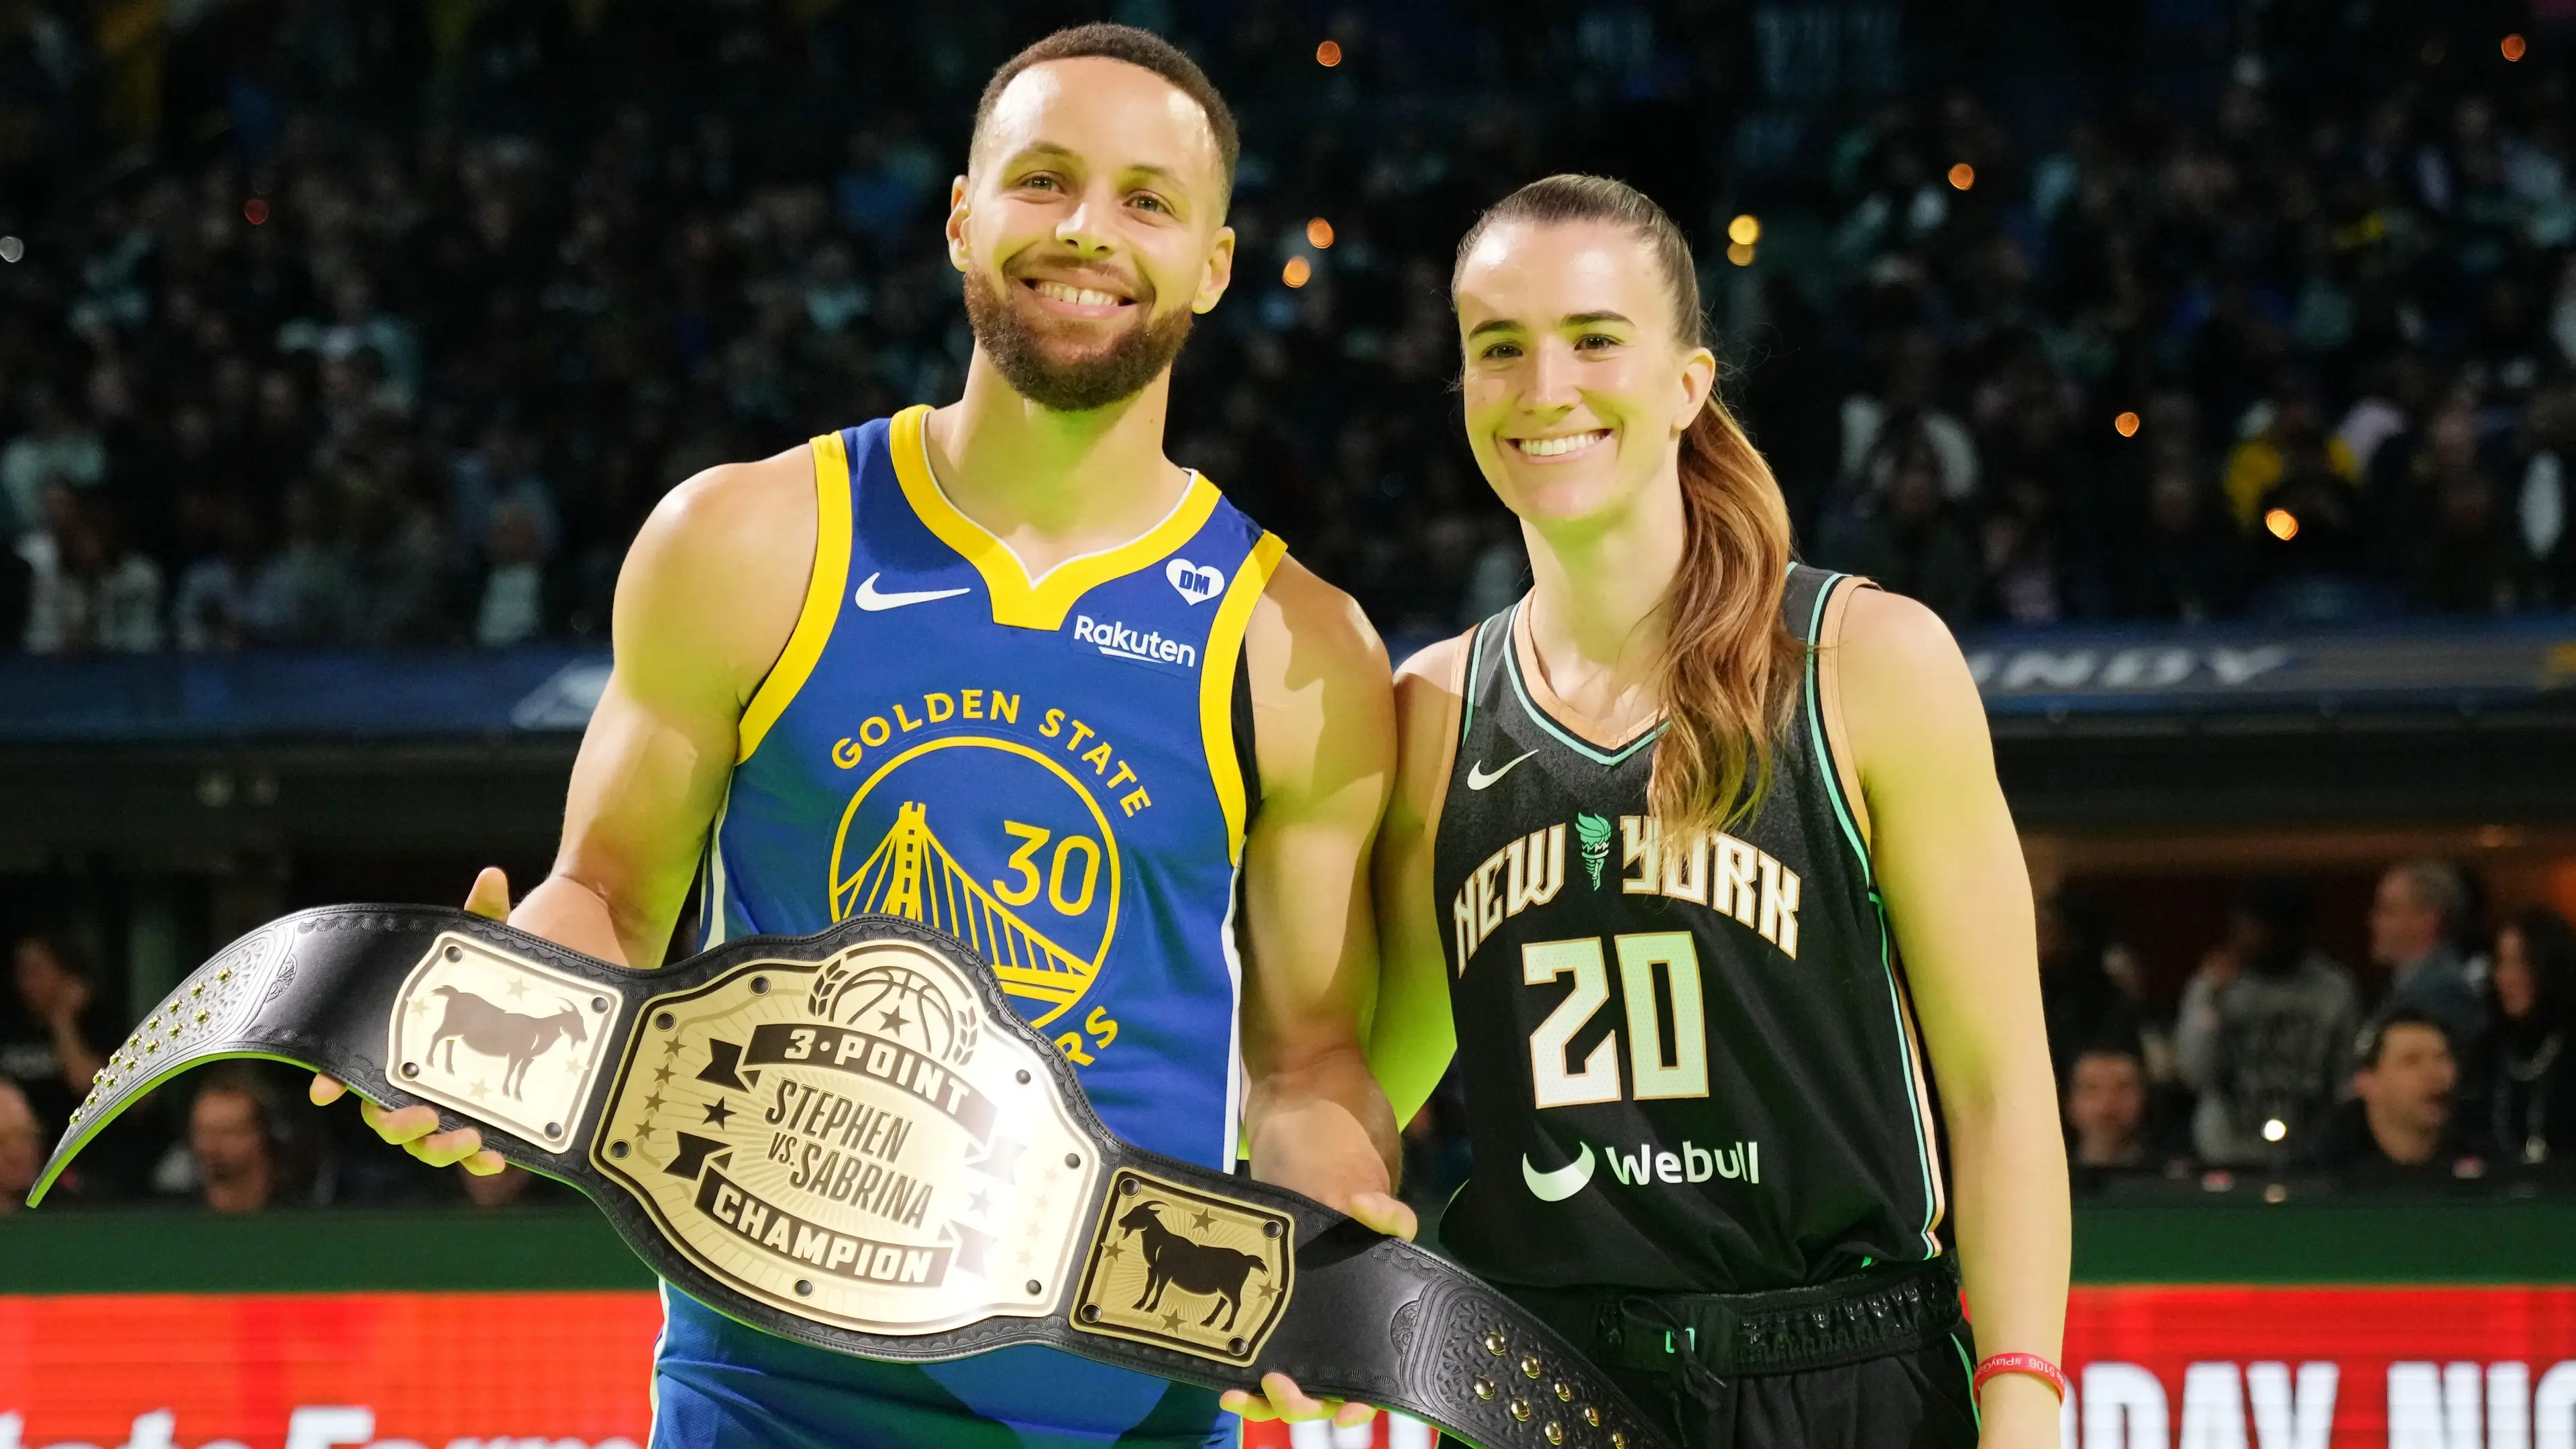 Golden State Warriors guard Stephen Curry (30) and New York Liberty guard Sabrina Ionescu (20) after the Stephen vs Sebrina three-point challenge during NBA All Star Saturday Night at Lucas Oil Stadium / Kyle Terada - USA TODAY Sports